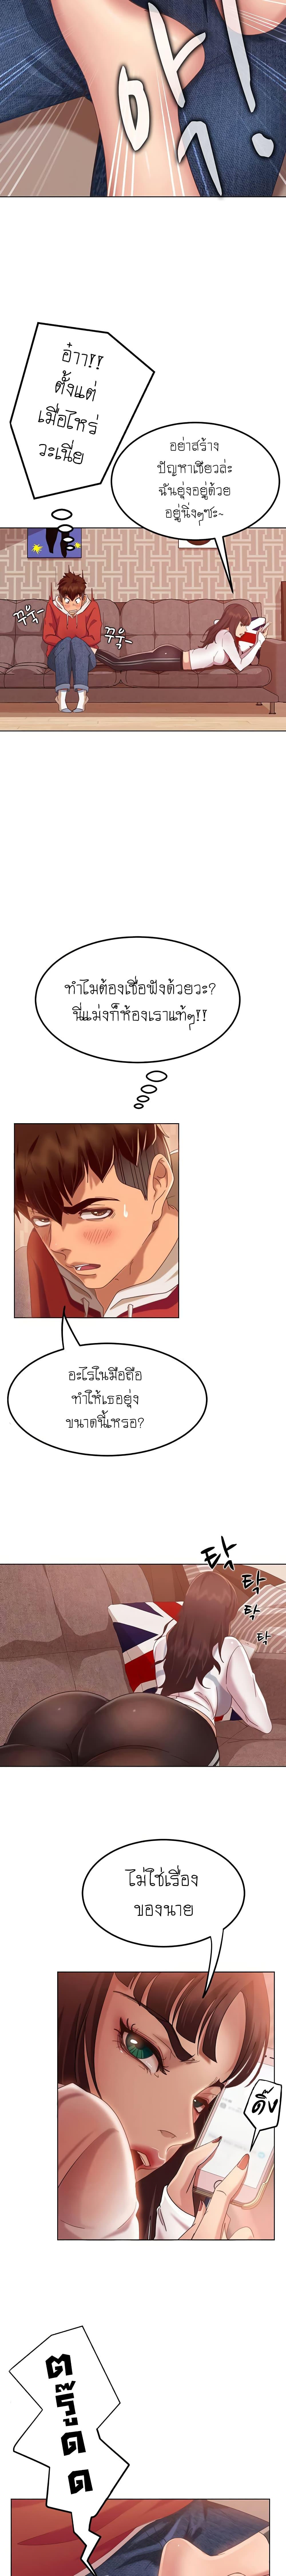 A Twisted Day 1 ภาพ 25